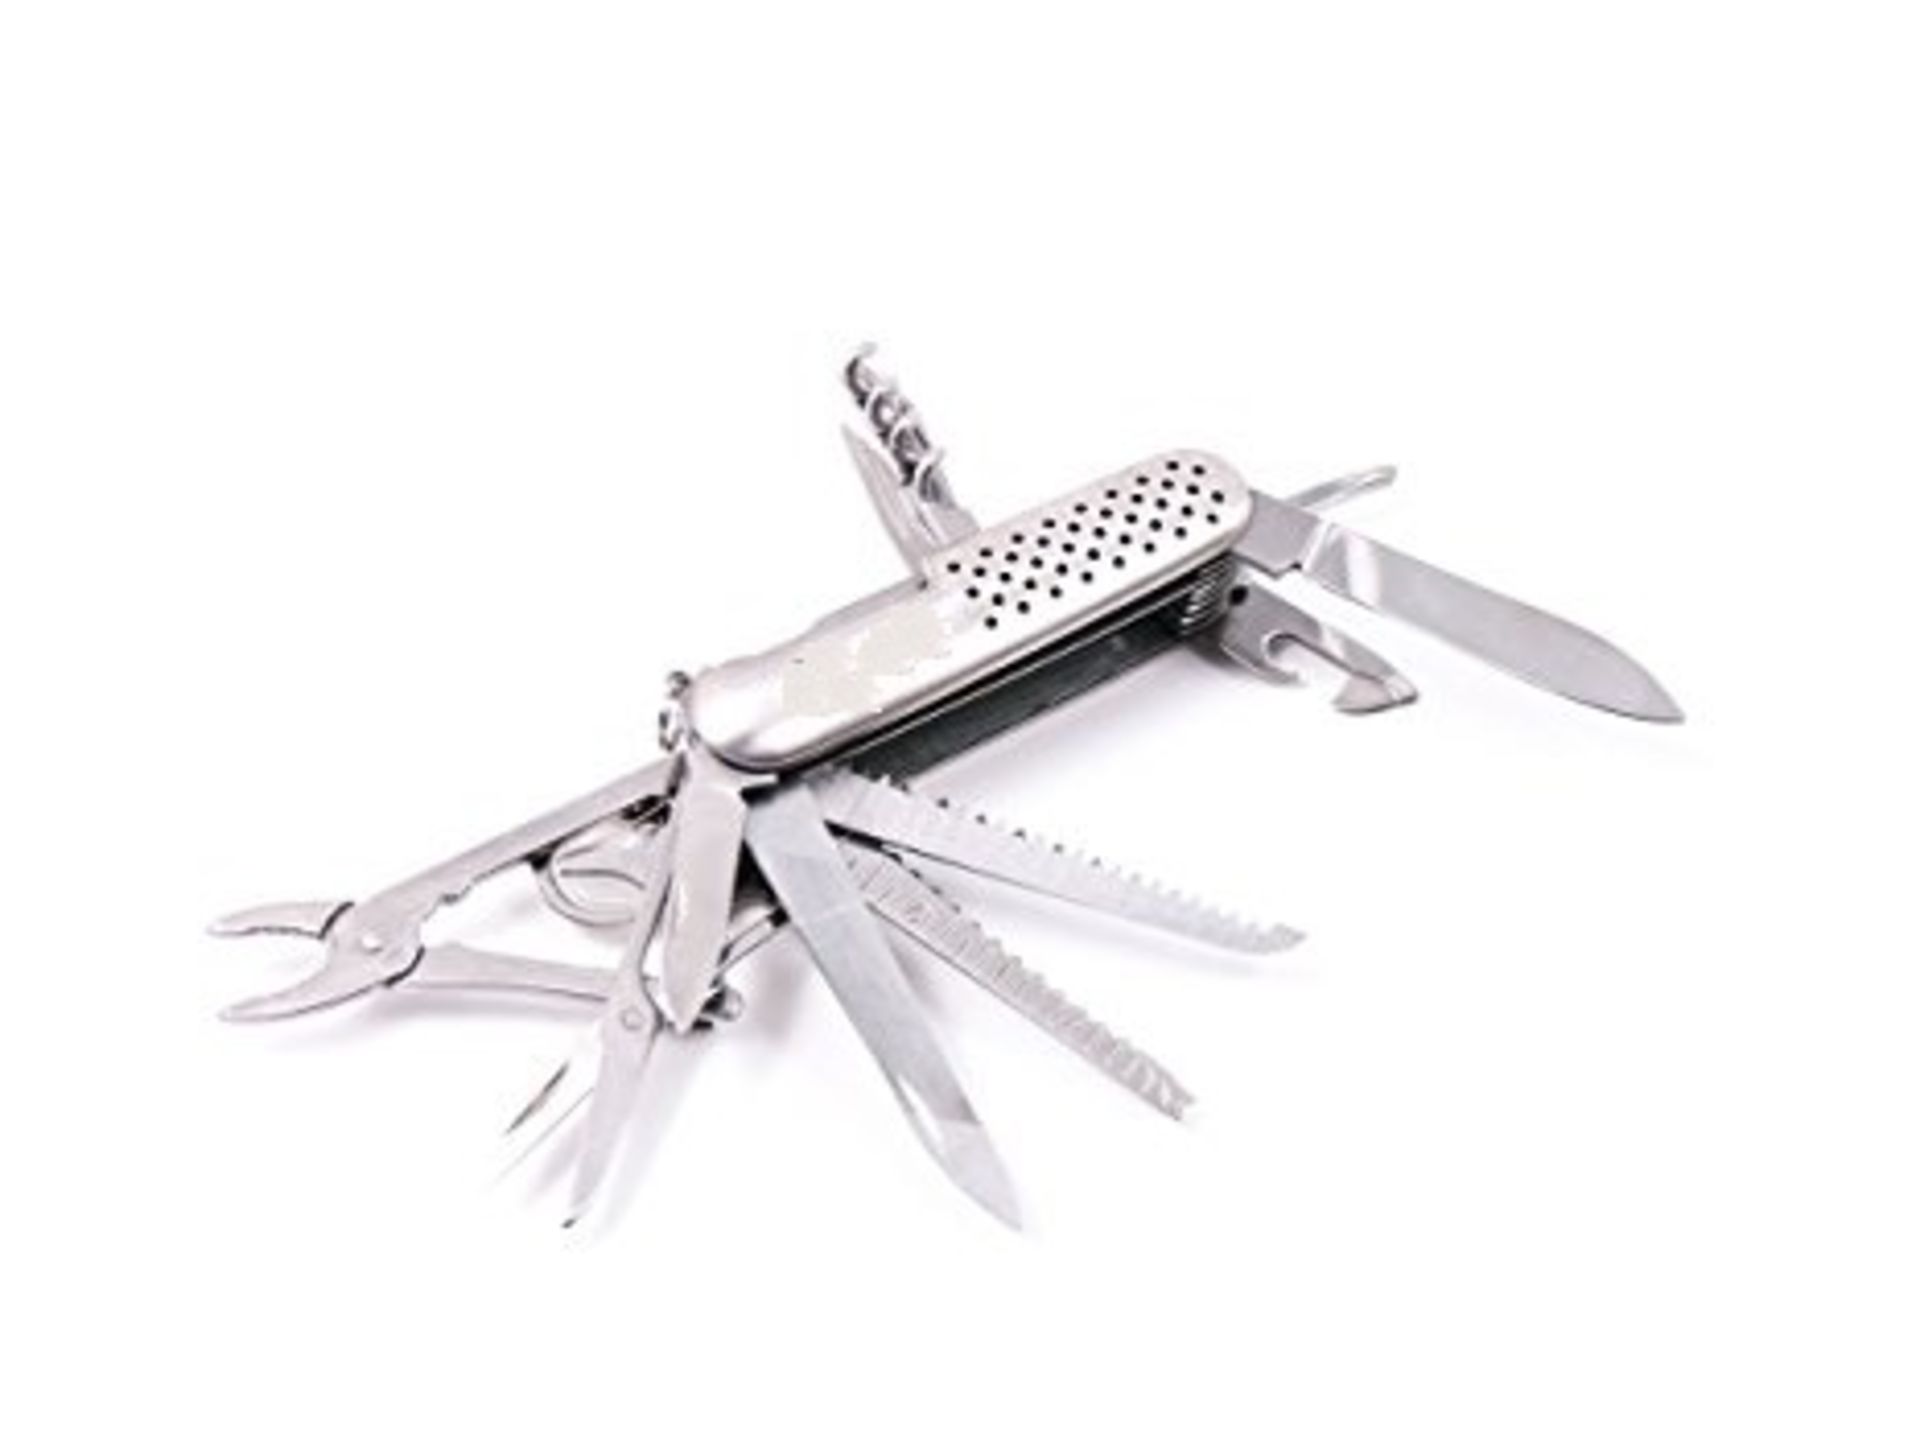 + VAT Brand New Multi Tool 21 in 1 Stainless Steel Multi Tool - Perfect For Camping, Hiking,